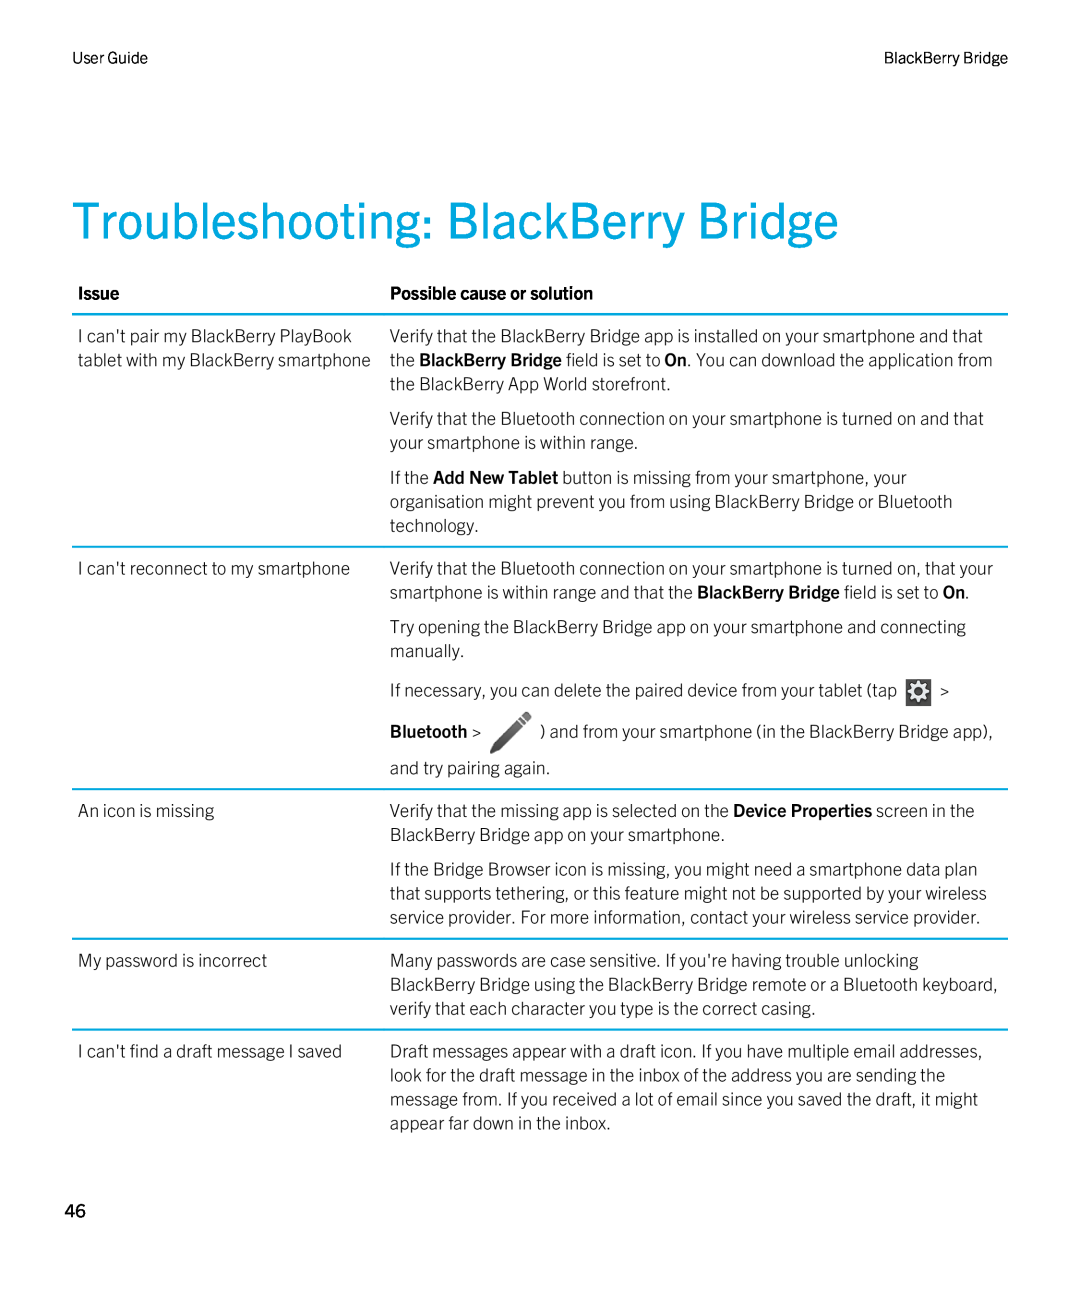 Blackberry 2.0.1 manual Troubleshooting BlackBerry Bridge, Issue, Possible cause or solution, Bluetooth 